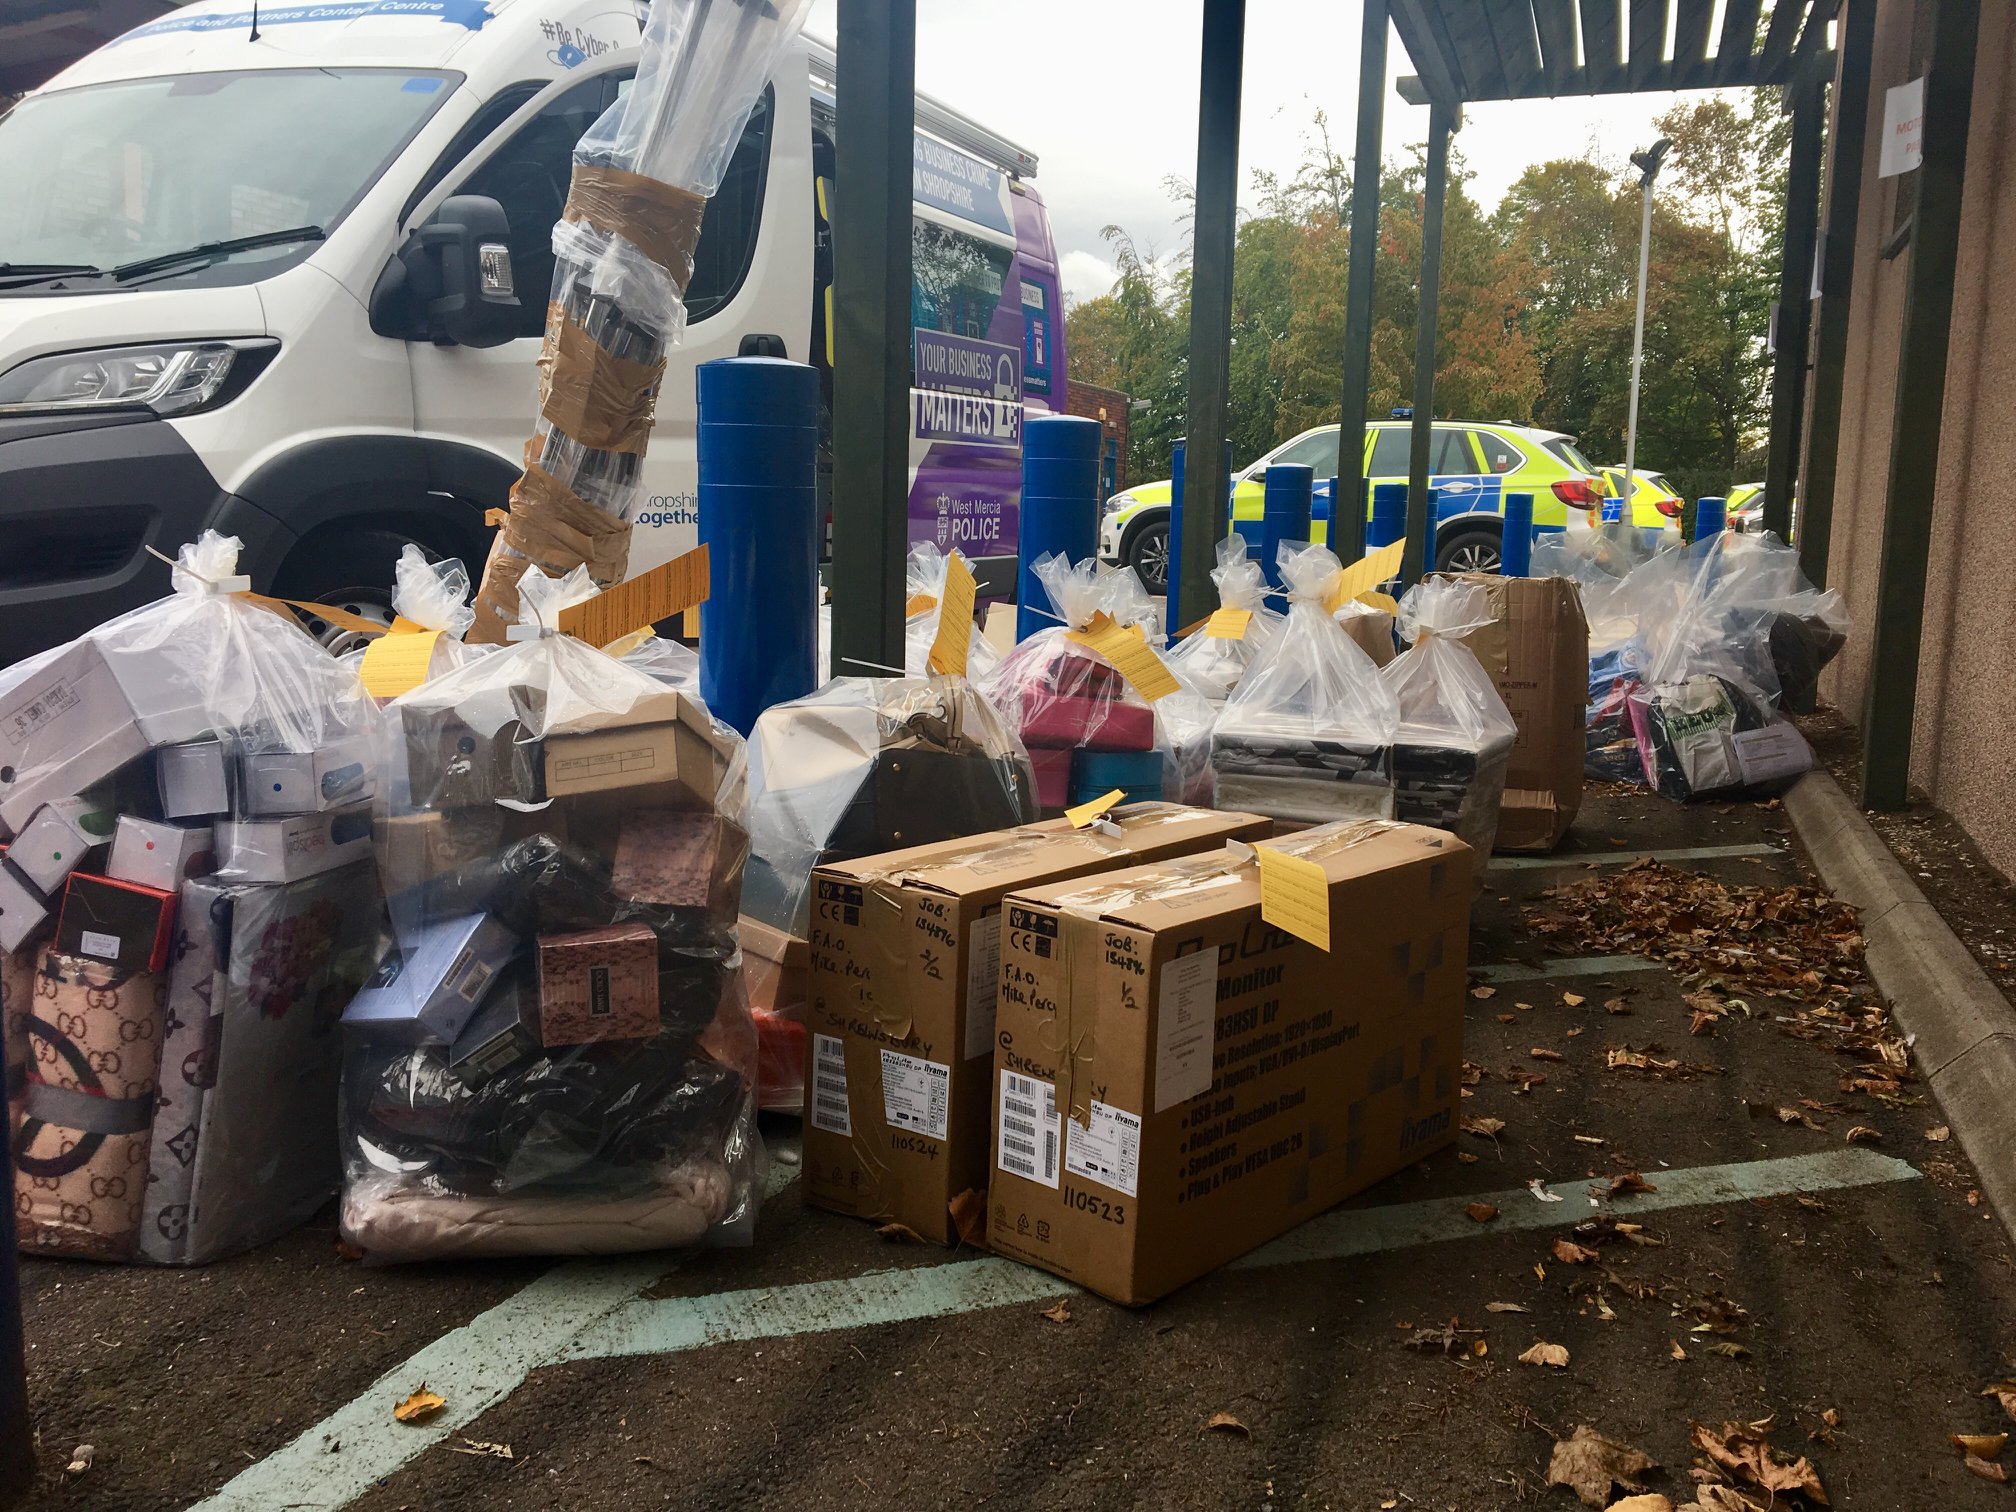 It's thought the goods could be worth around £50,000. Photo: West Mercia Police